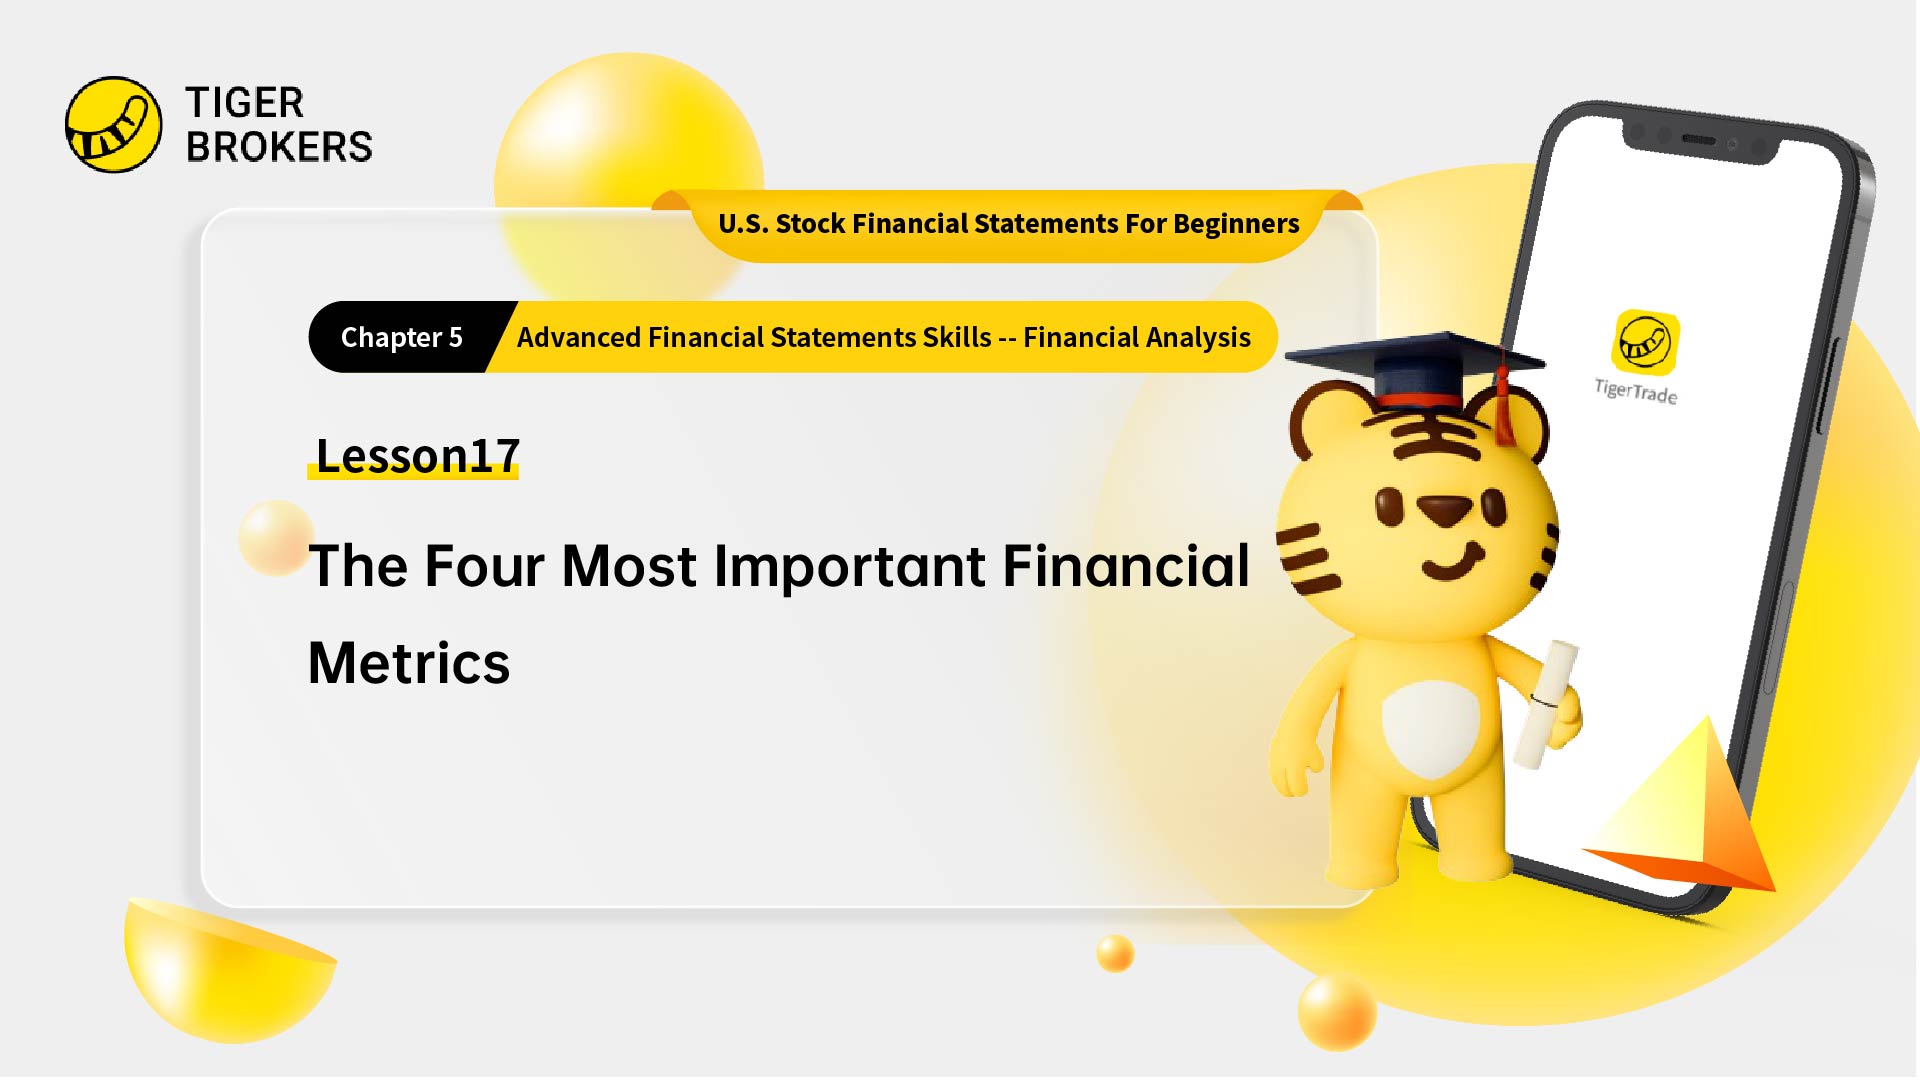 Lesson17: The four most important financial metrics